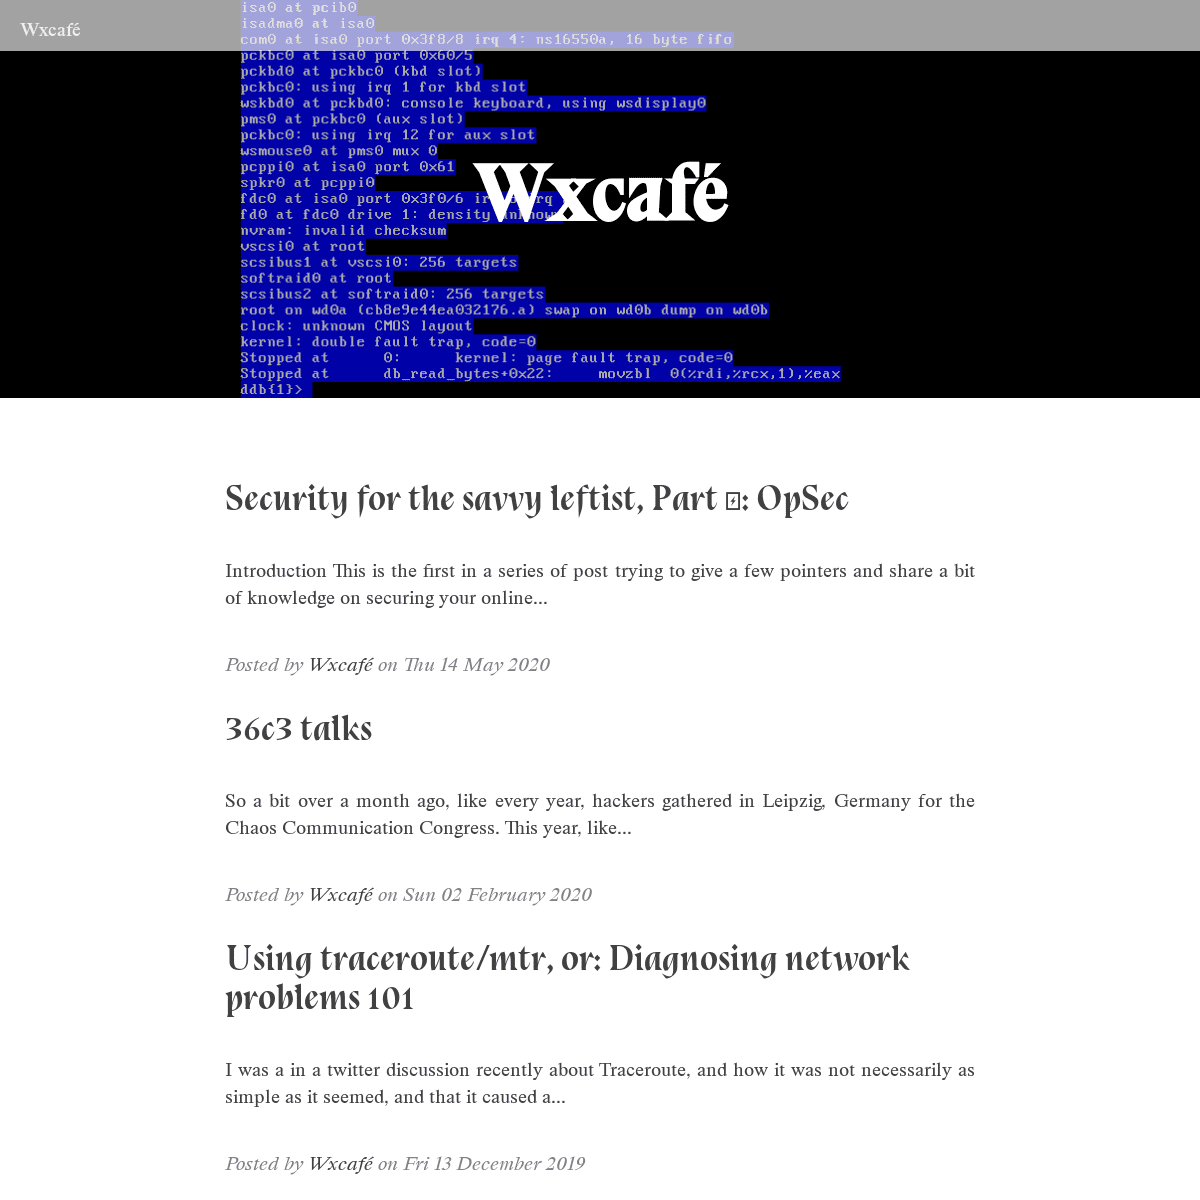 A complete backup of https://wxcafe.net